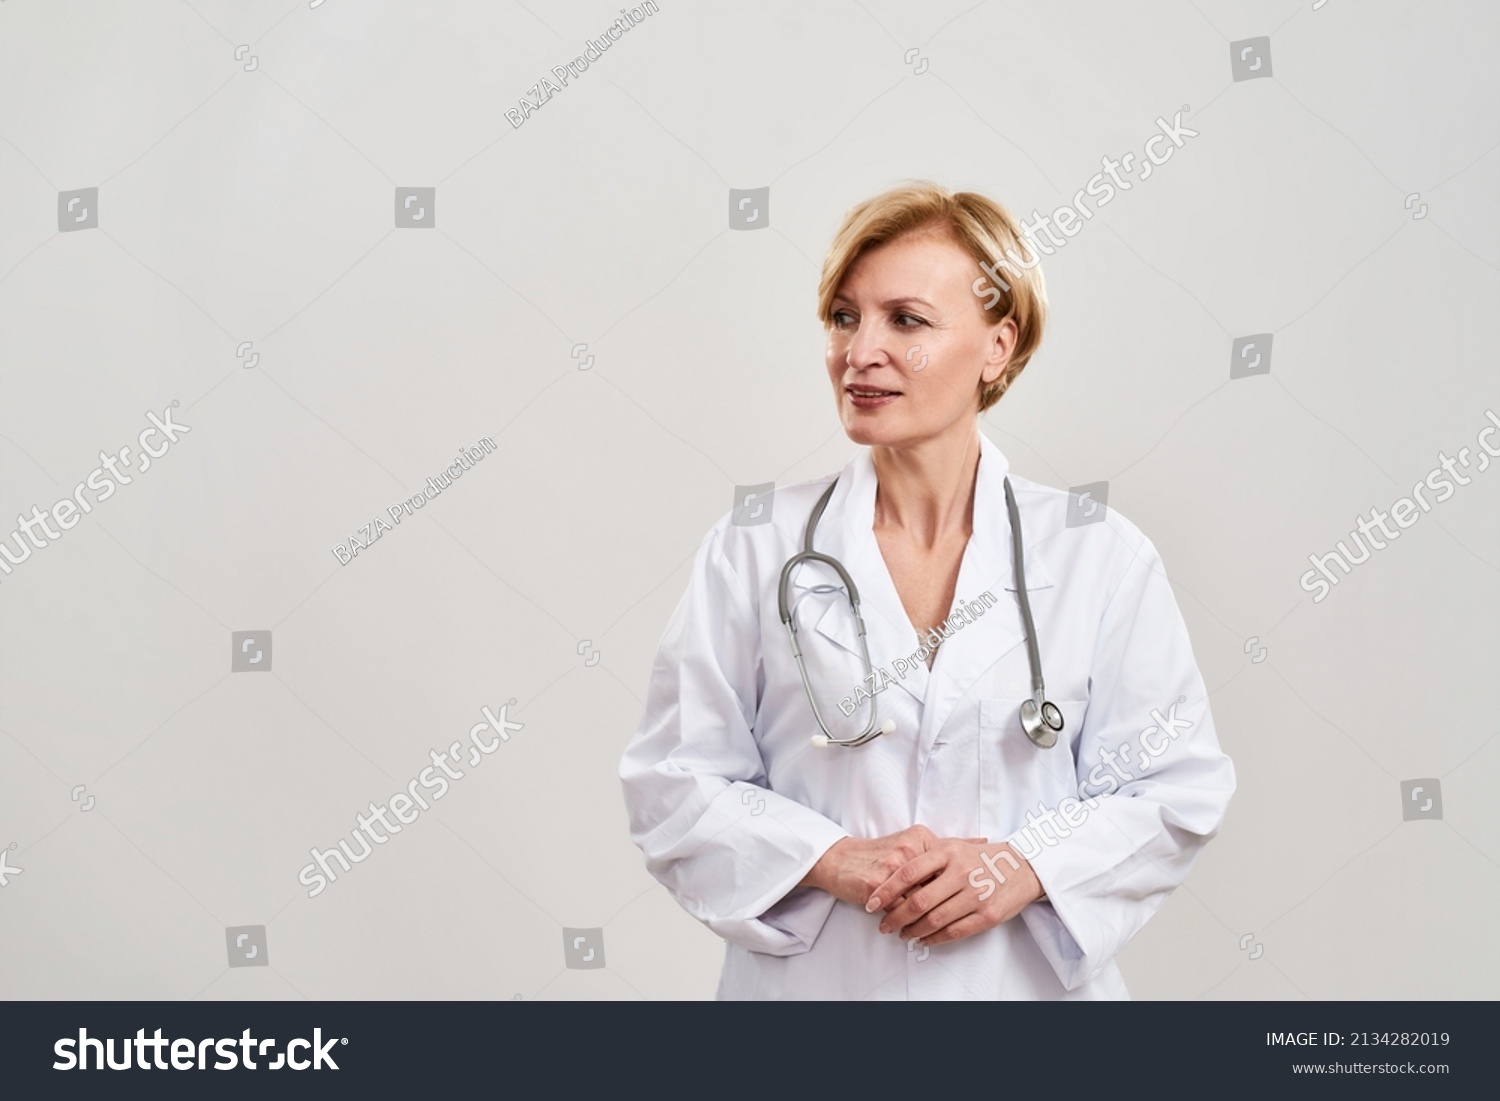 Partial image of focused female doctor looking away. Caucasian woman with stethoscope wearing white coat. Concept of medical and health care. Isolated on white background. Studio shoot. Copy space #2134282019